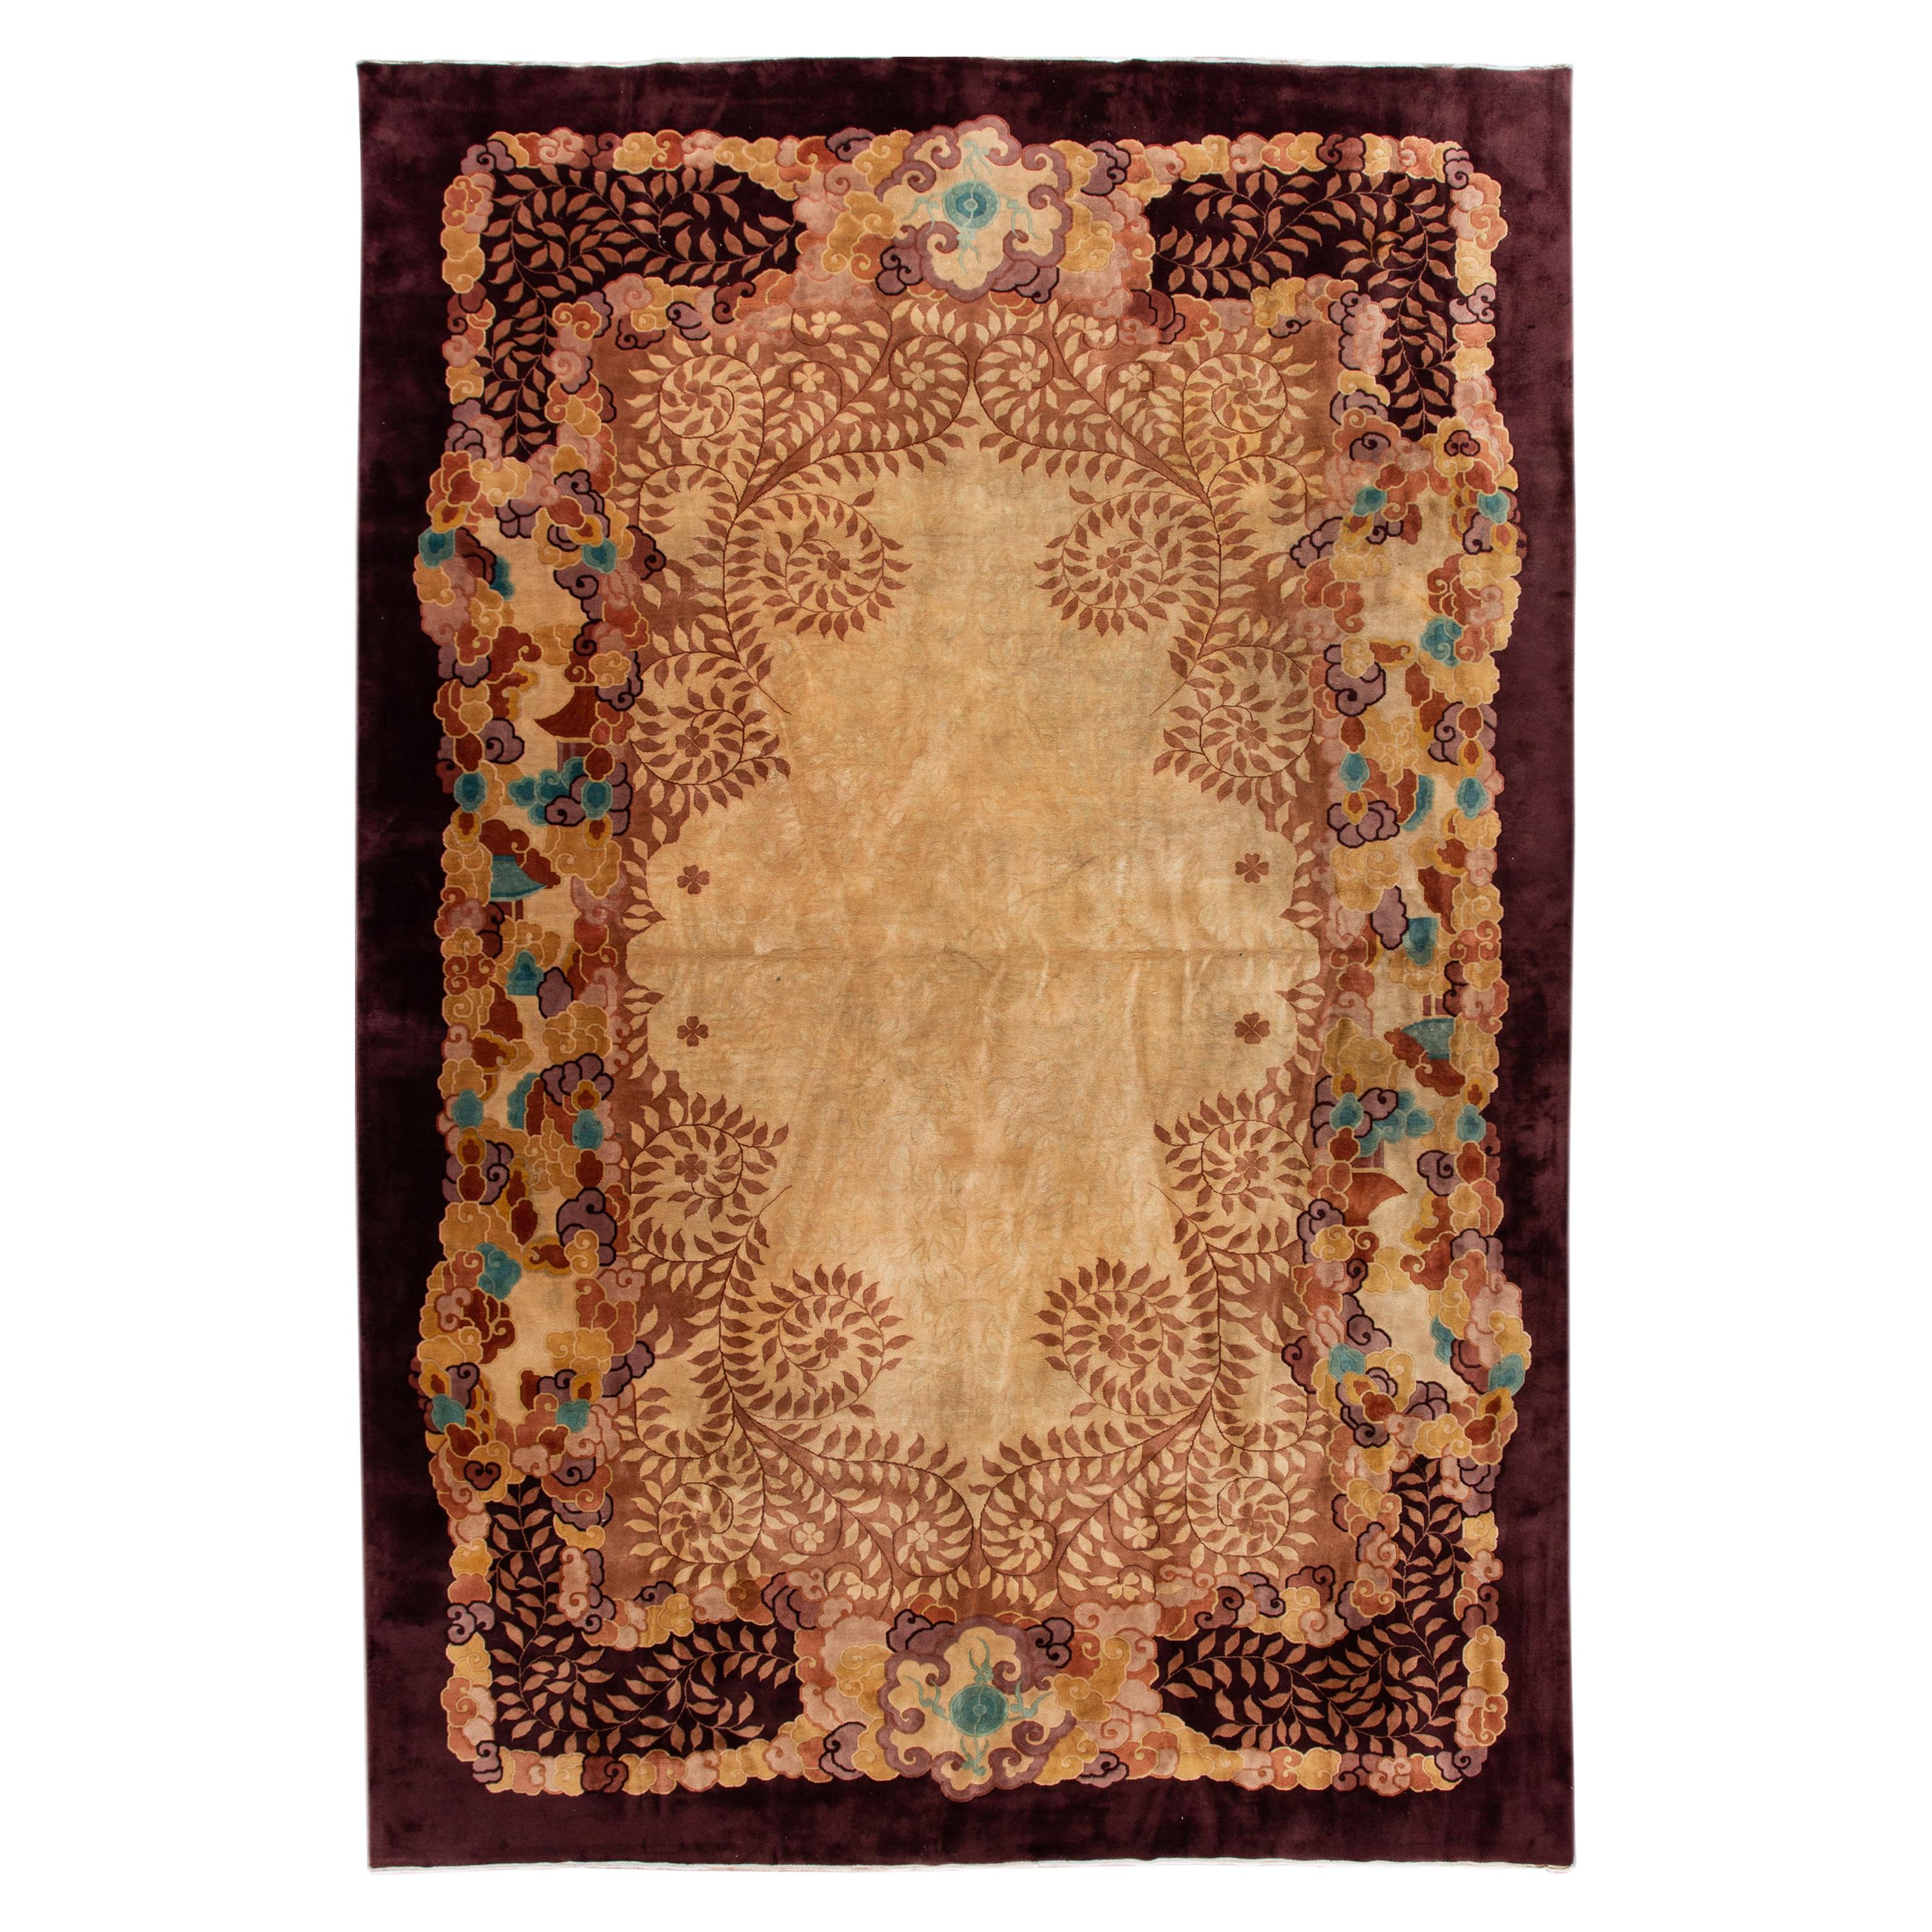 Antique Goldenrod Art Deco Chinese Wool Rug 10b Ft 9 In X 16 Ft 6 In. For Sale